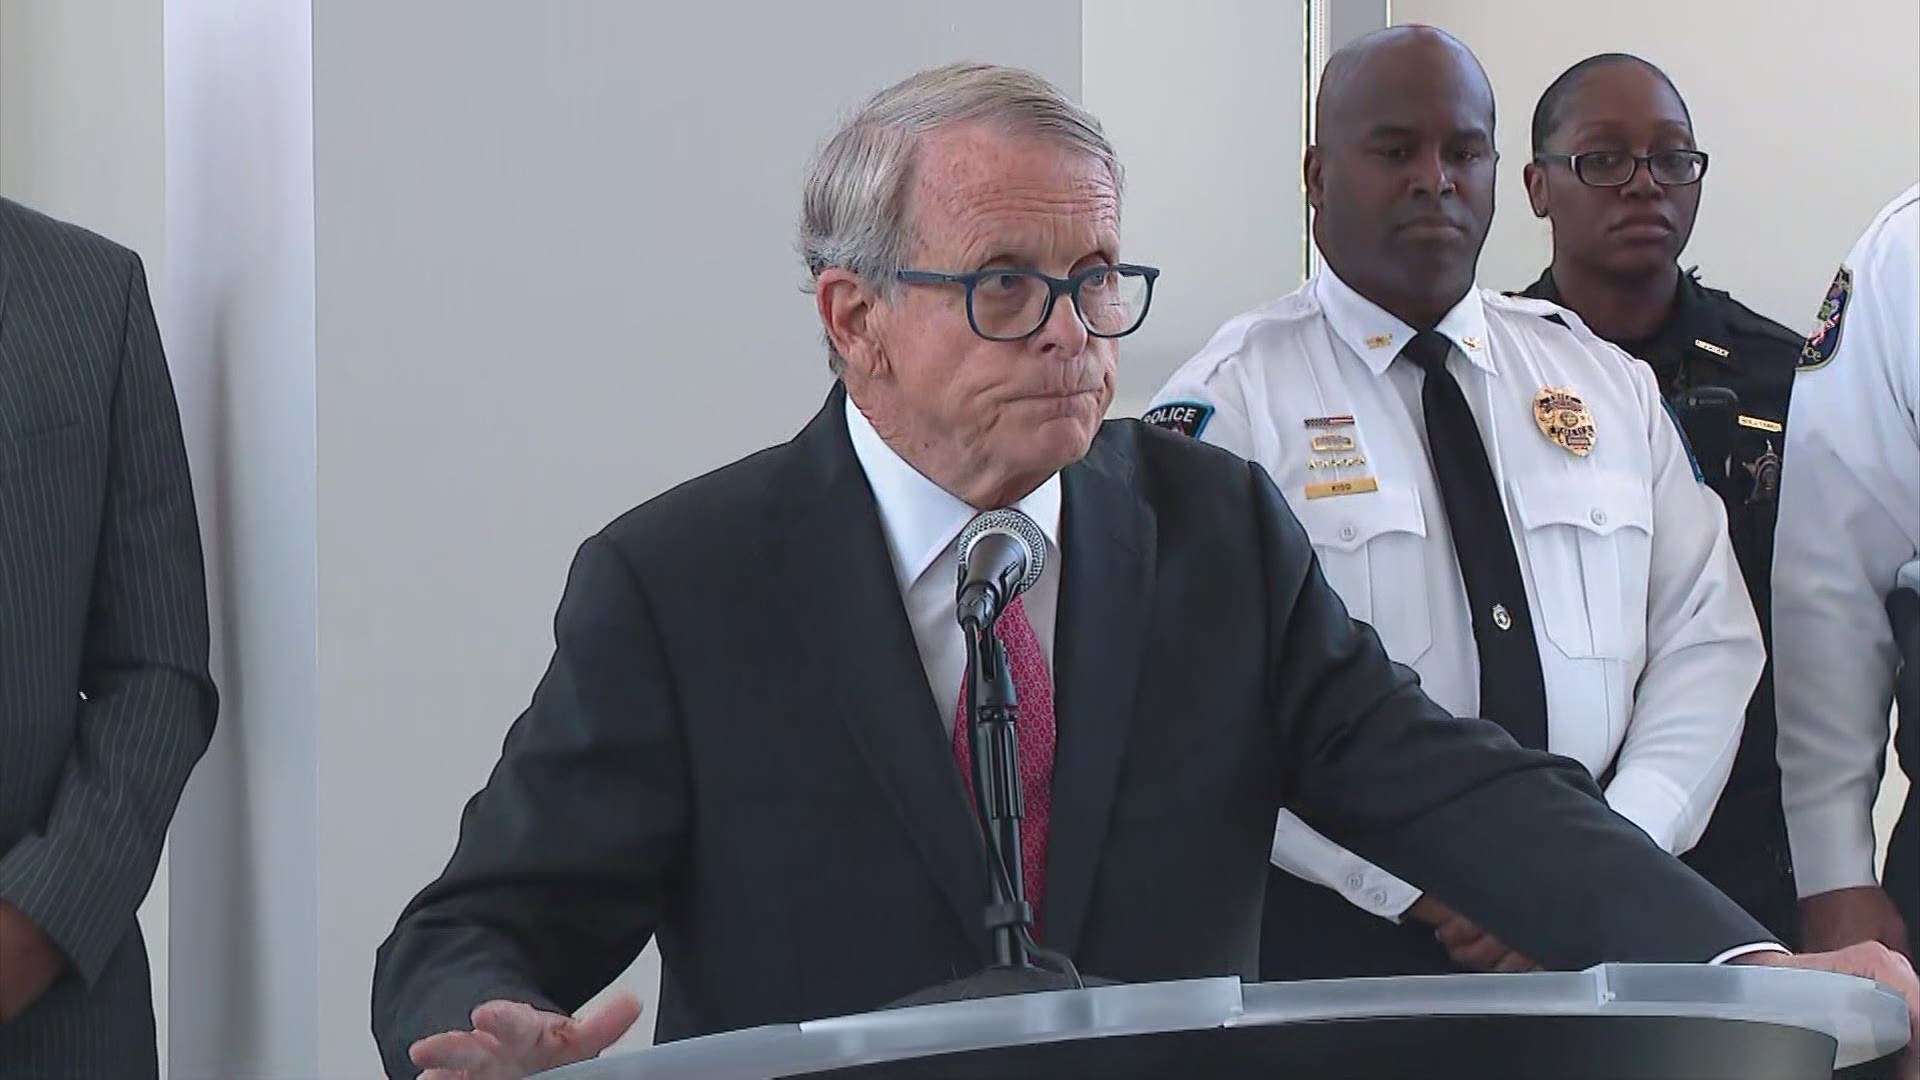 The group accused of plotting to kidnap Michigan Gov. Gretchen Whitmer also proposed an attack against Ohio Gov. Mike DeWine, a federal prosecutor said.